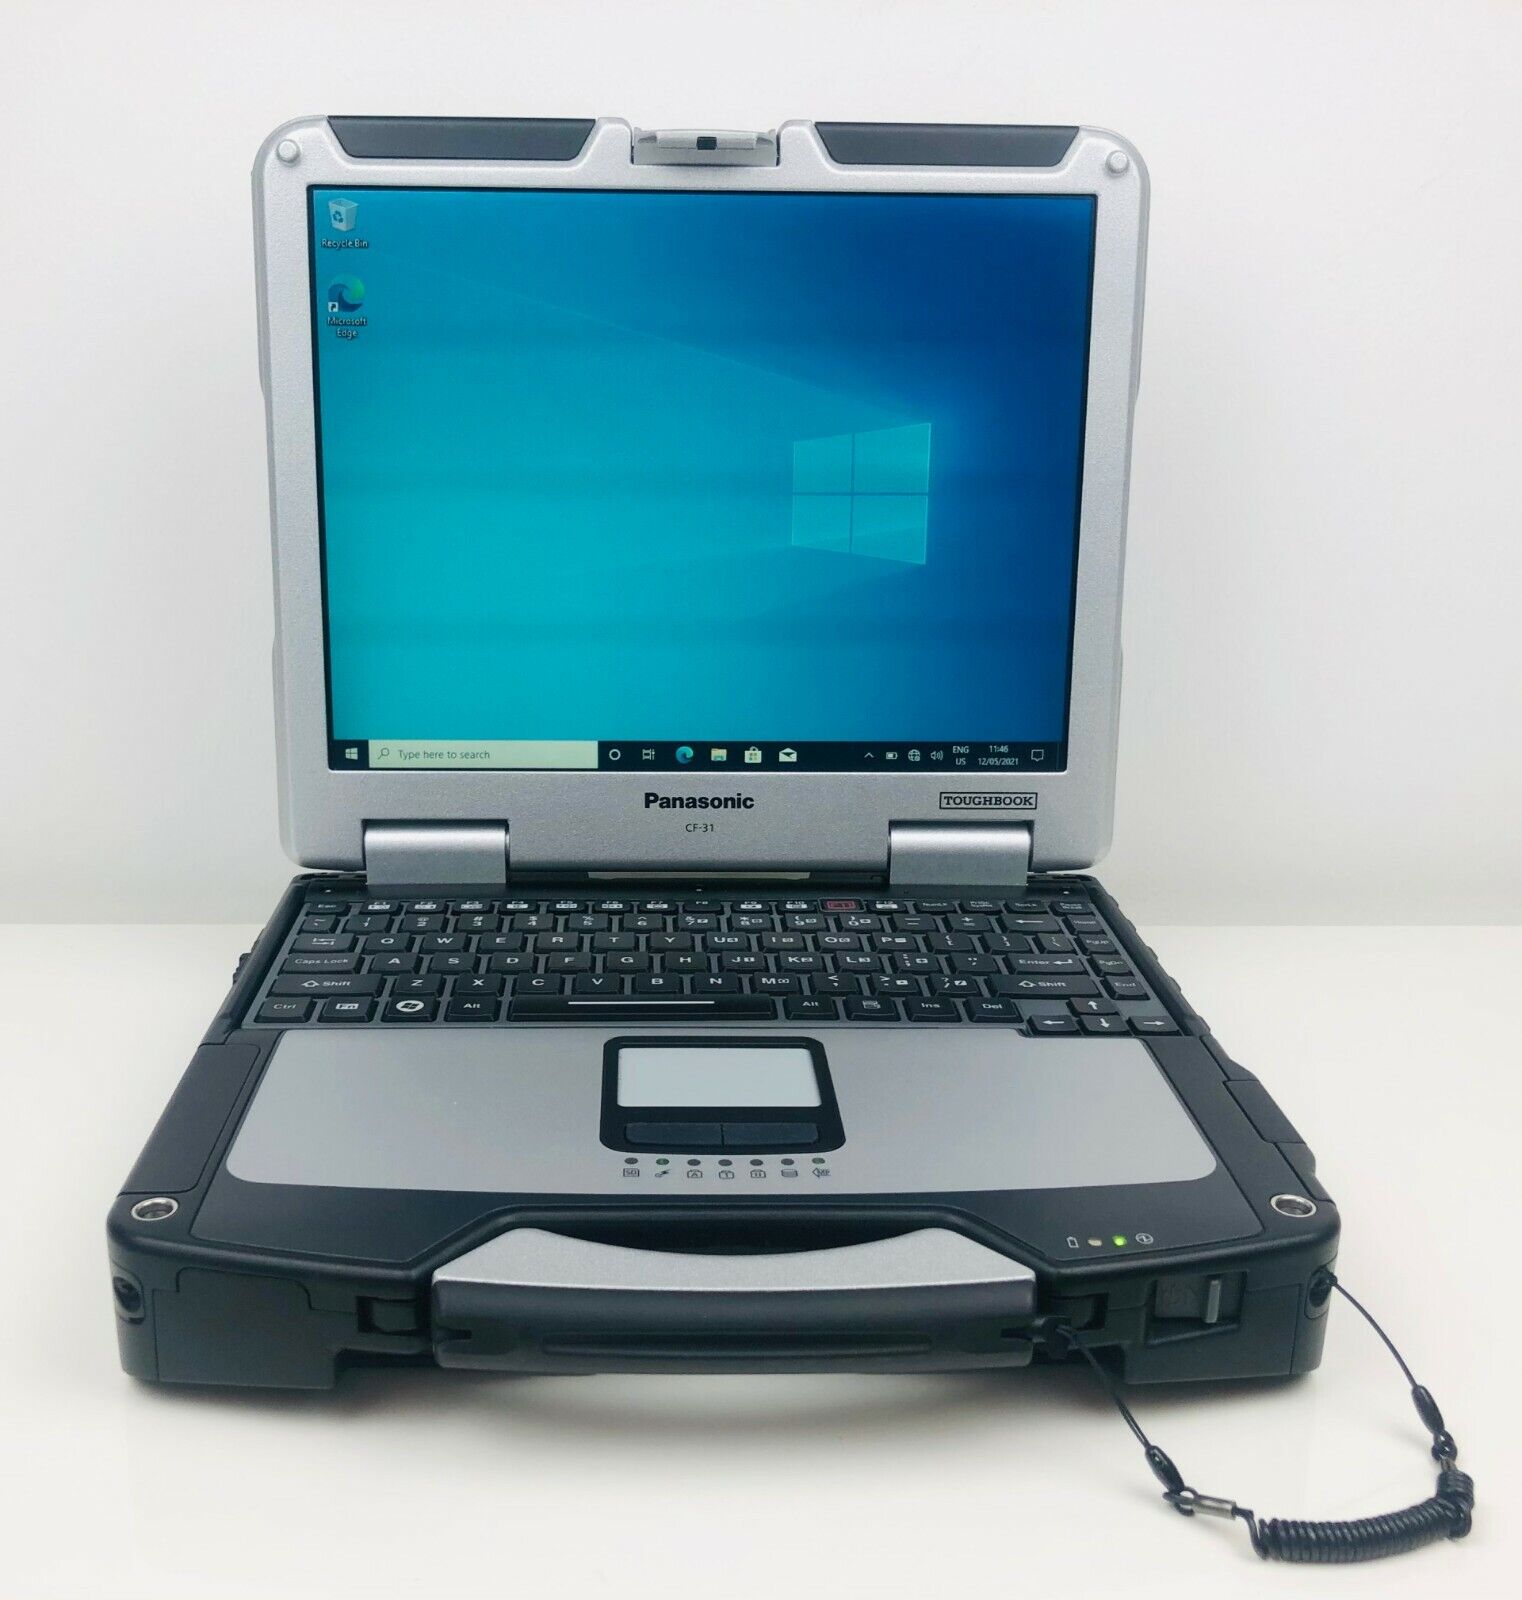 Welcome to ToughbookBIOS.com: The Genesis of Your Ultimate Toughbook BIOS Solution - Toughbook BIOS Password Recovery